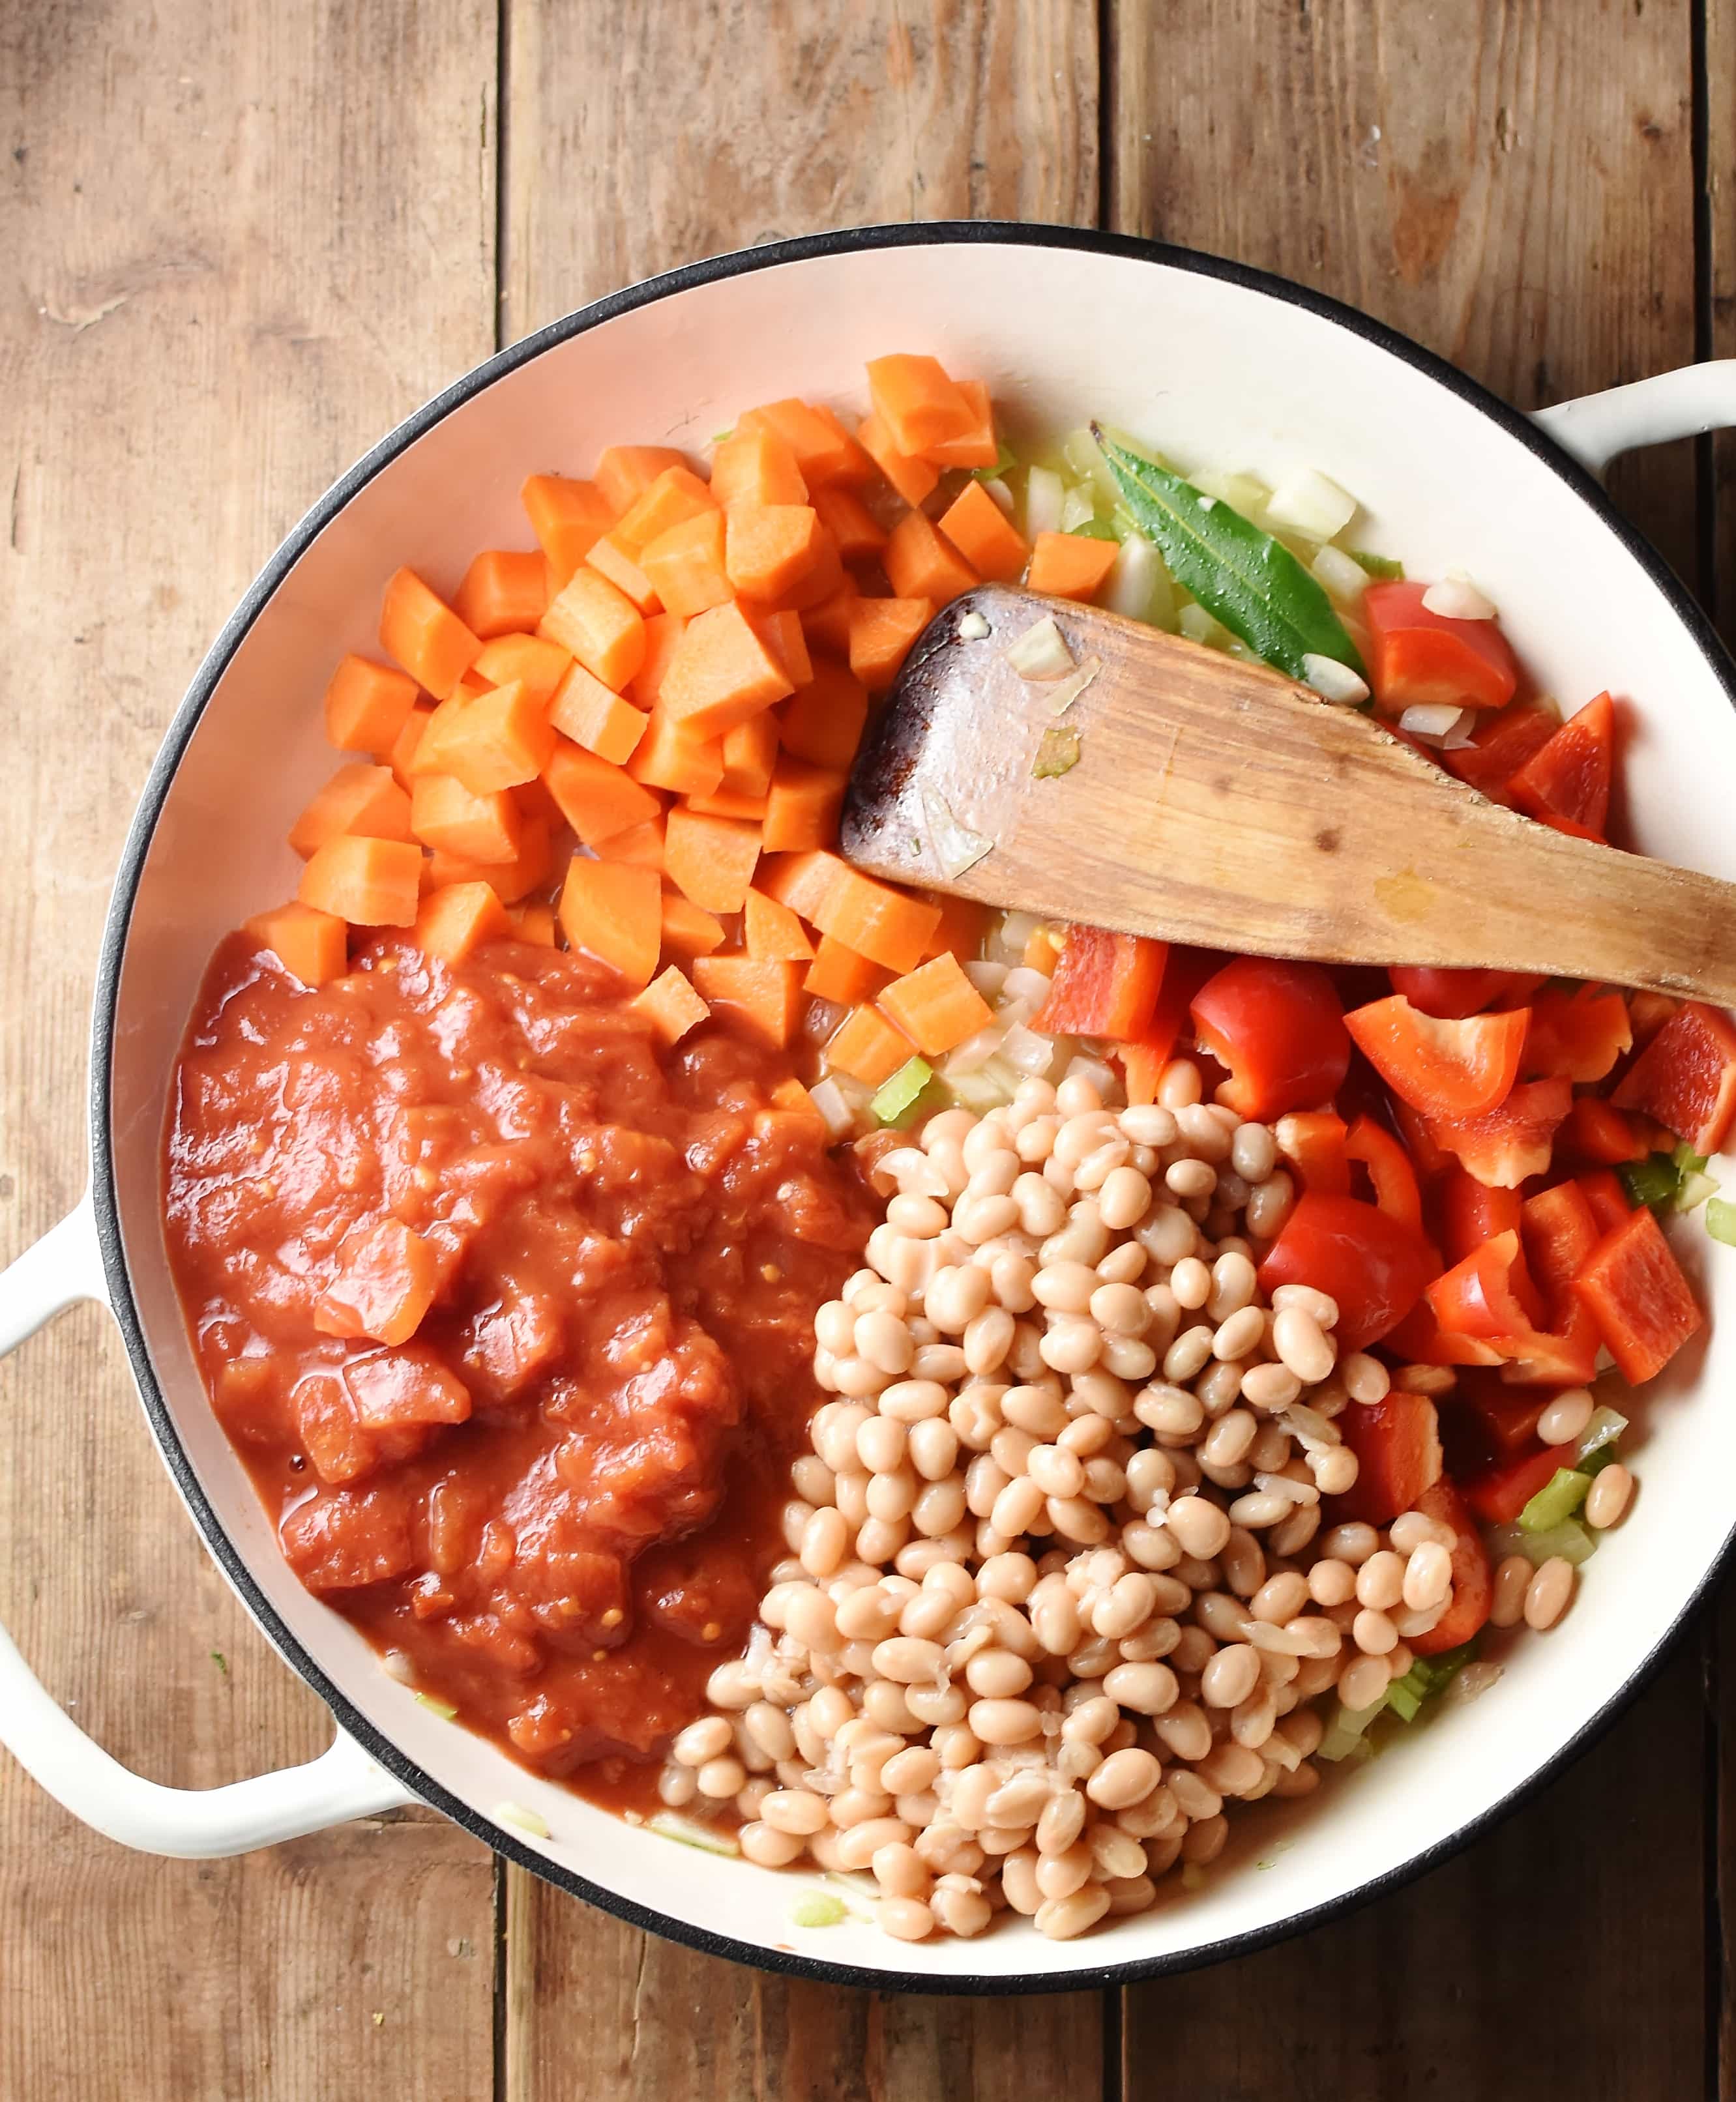 Beans, tomatoes, diced carrots and chopped red pepper in large shallow white dish with wooden spatula.